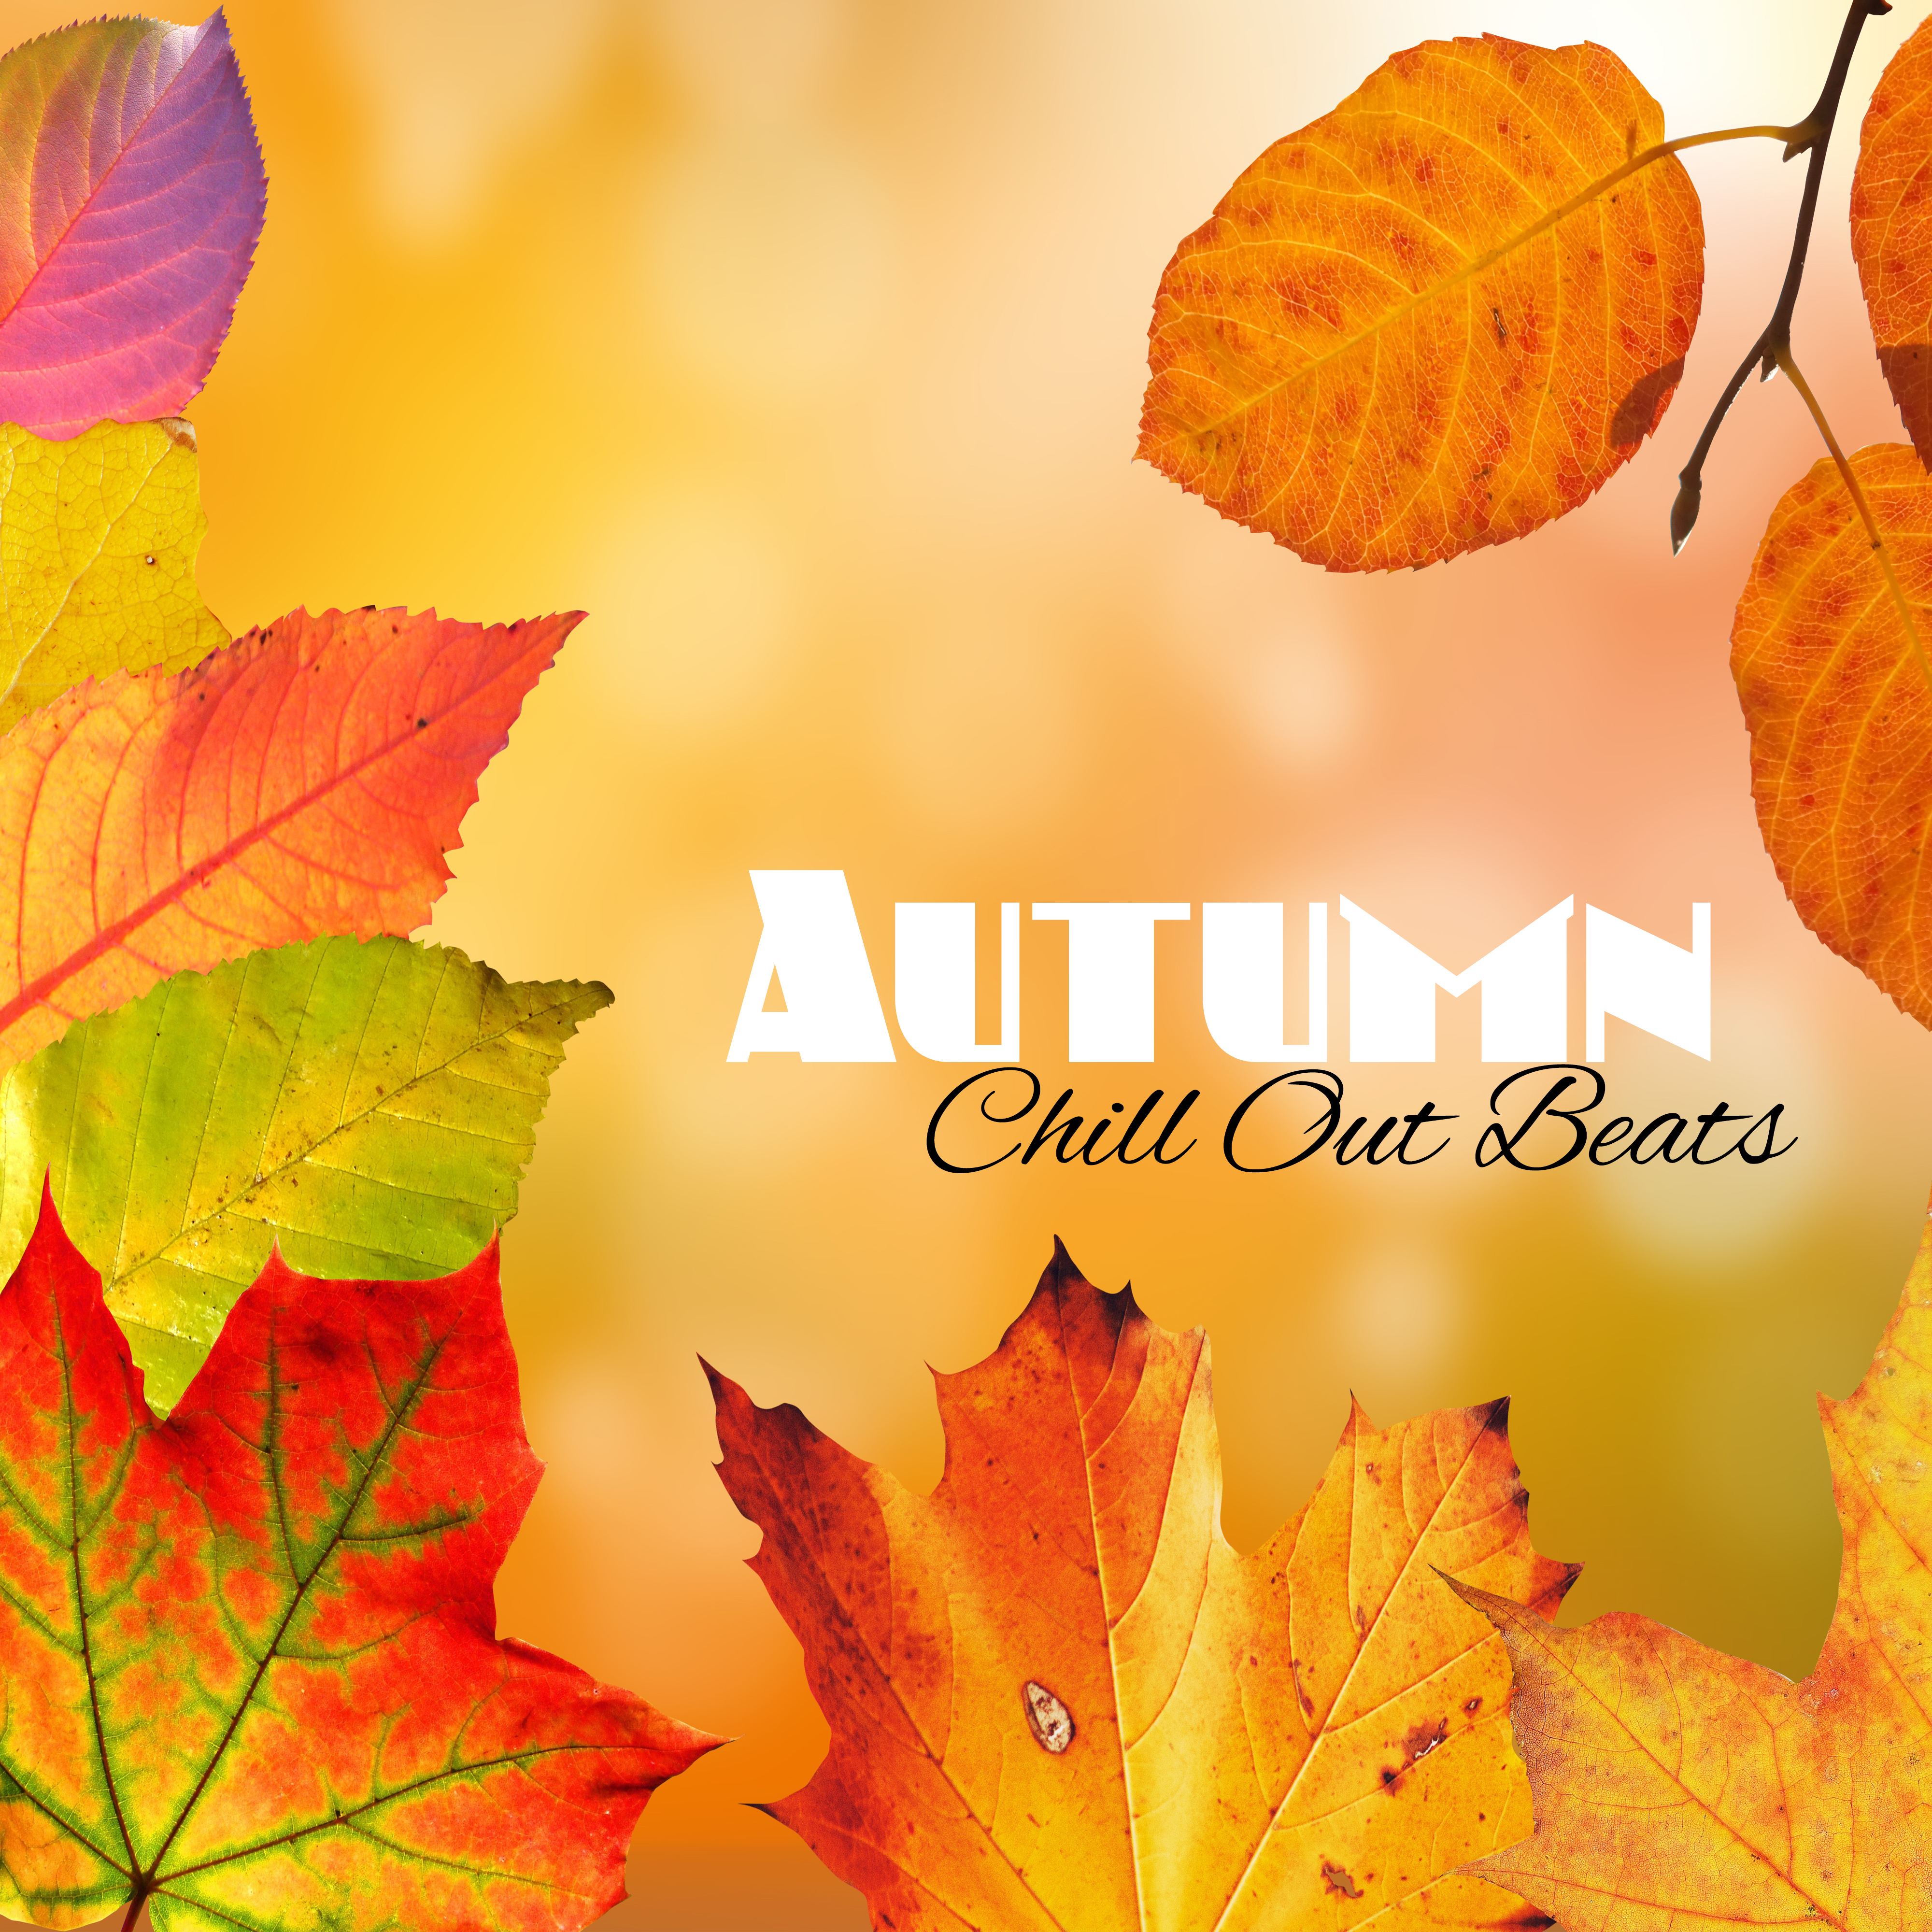 Autumn Chill Out Beats – Calm Melodies to Relax, Chill Out Beats, Soft Vibes, Evening Relaxation